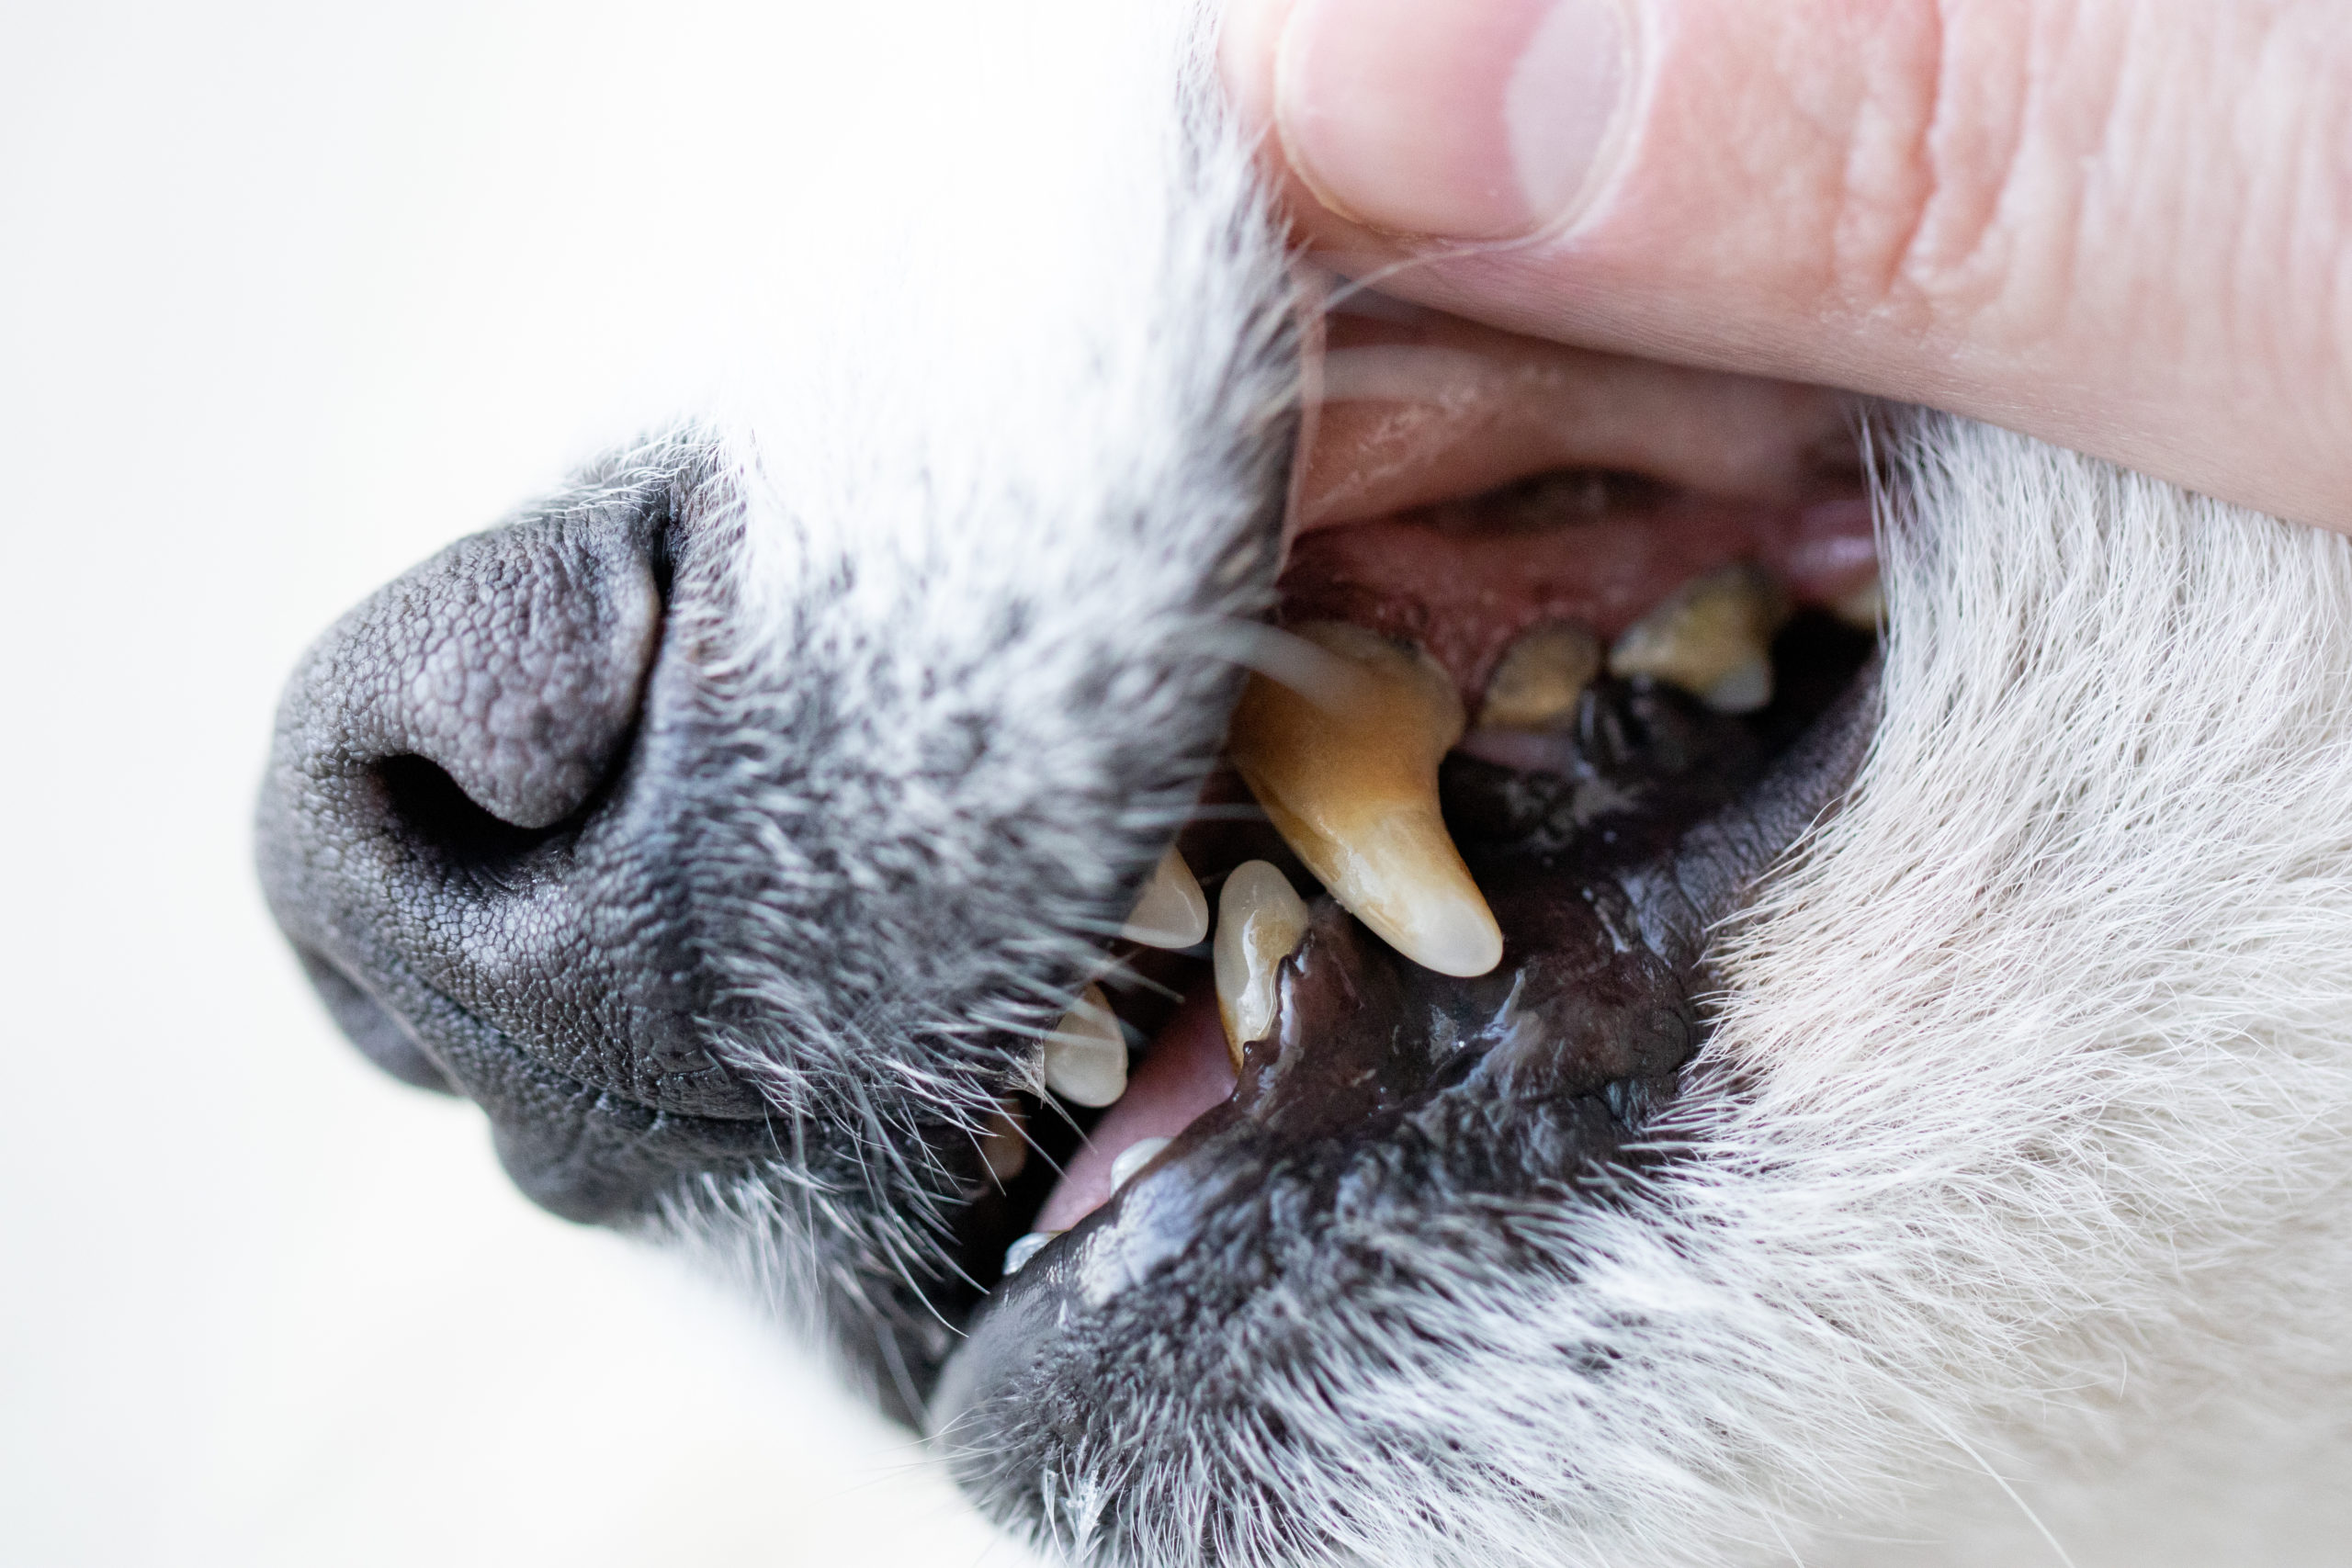 Dogs have problems with oral cavity, limestone, gingivitis, tooth decay. bad teeth dog.